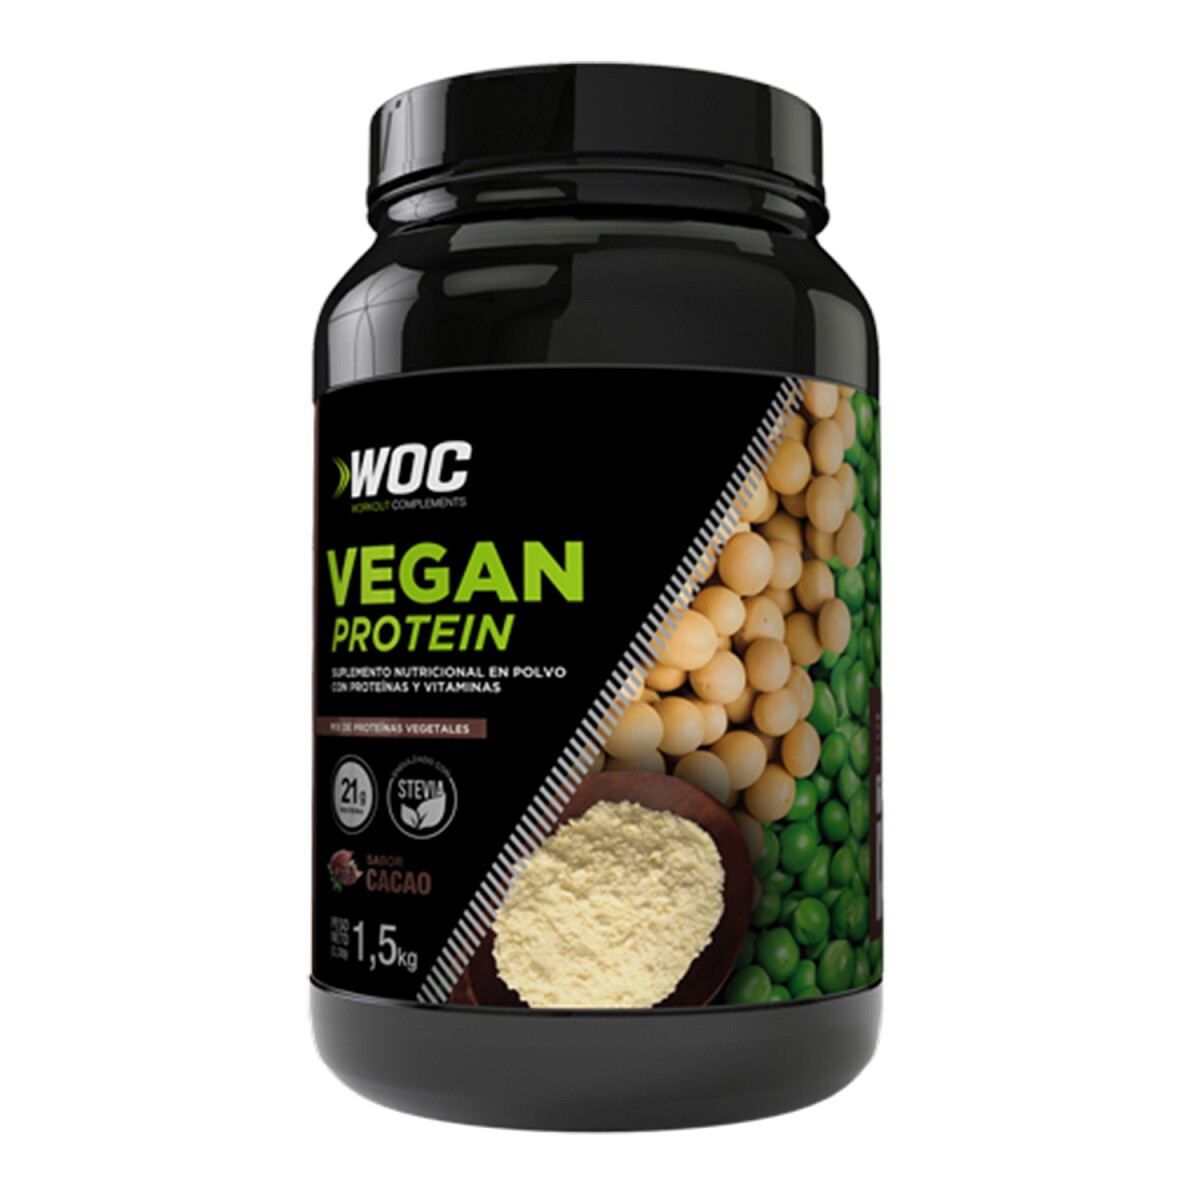 Vegan Protein Woc Cacao 1,5 Kgs. 